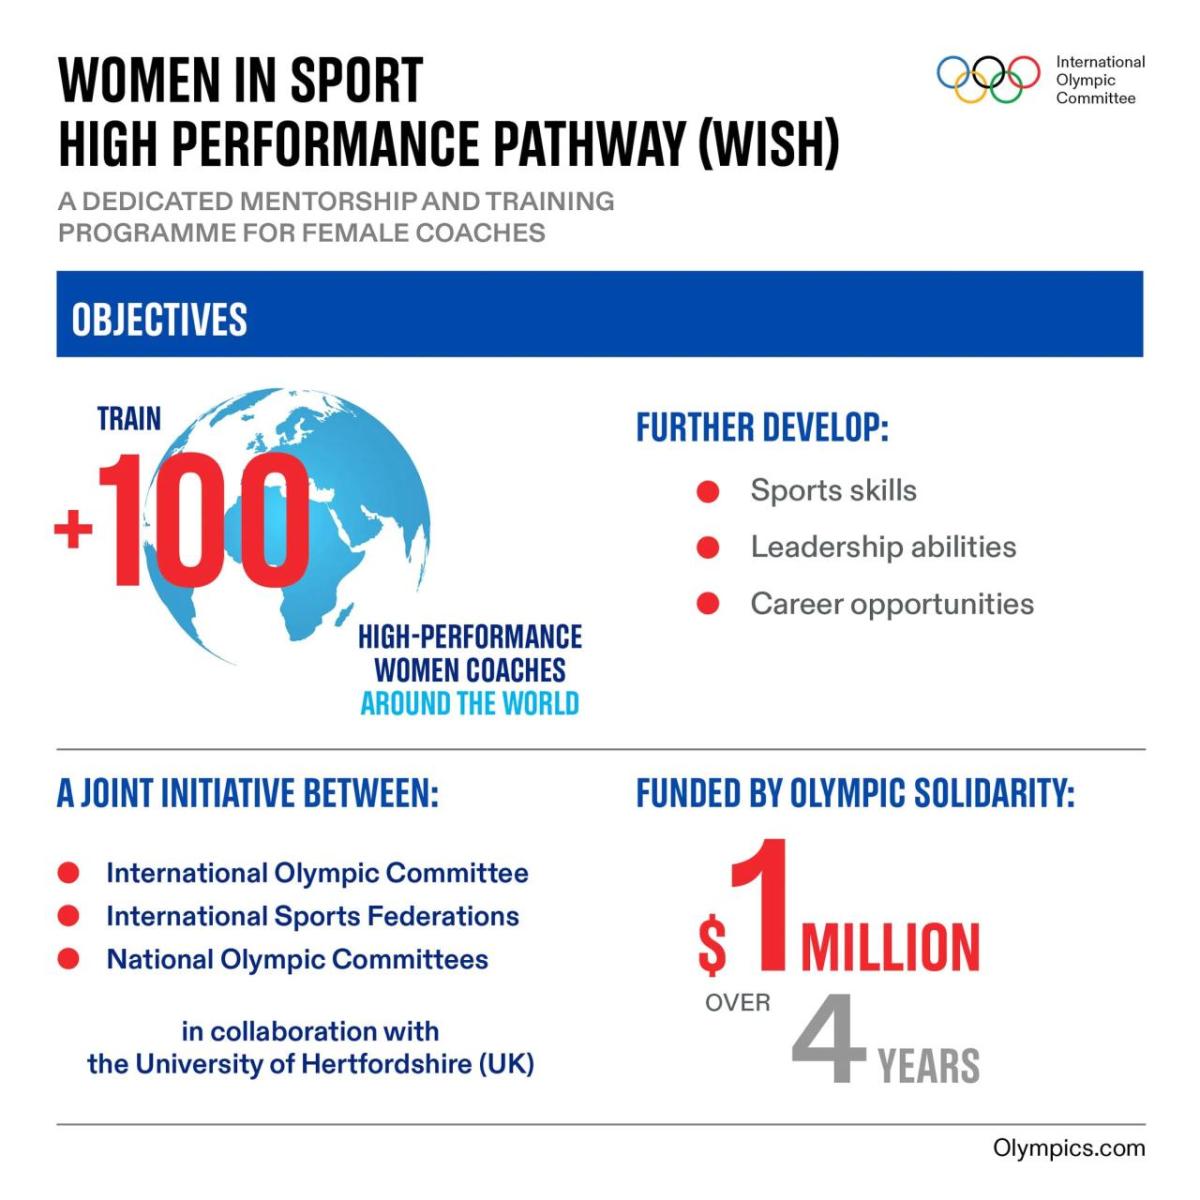 Info graphic: "Women in Sport High Performance Pathway (WISH) with statistics for objectives to train 100+ coaches around the world, joint initiative organizations.